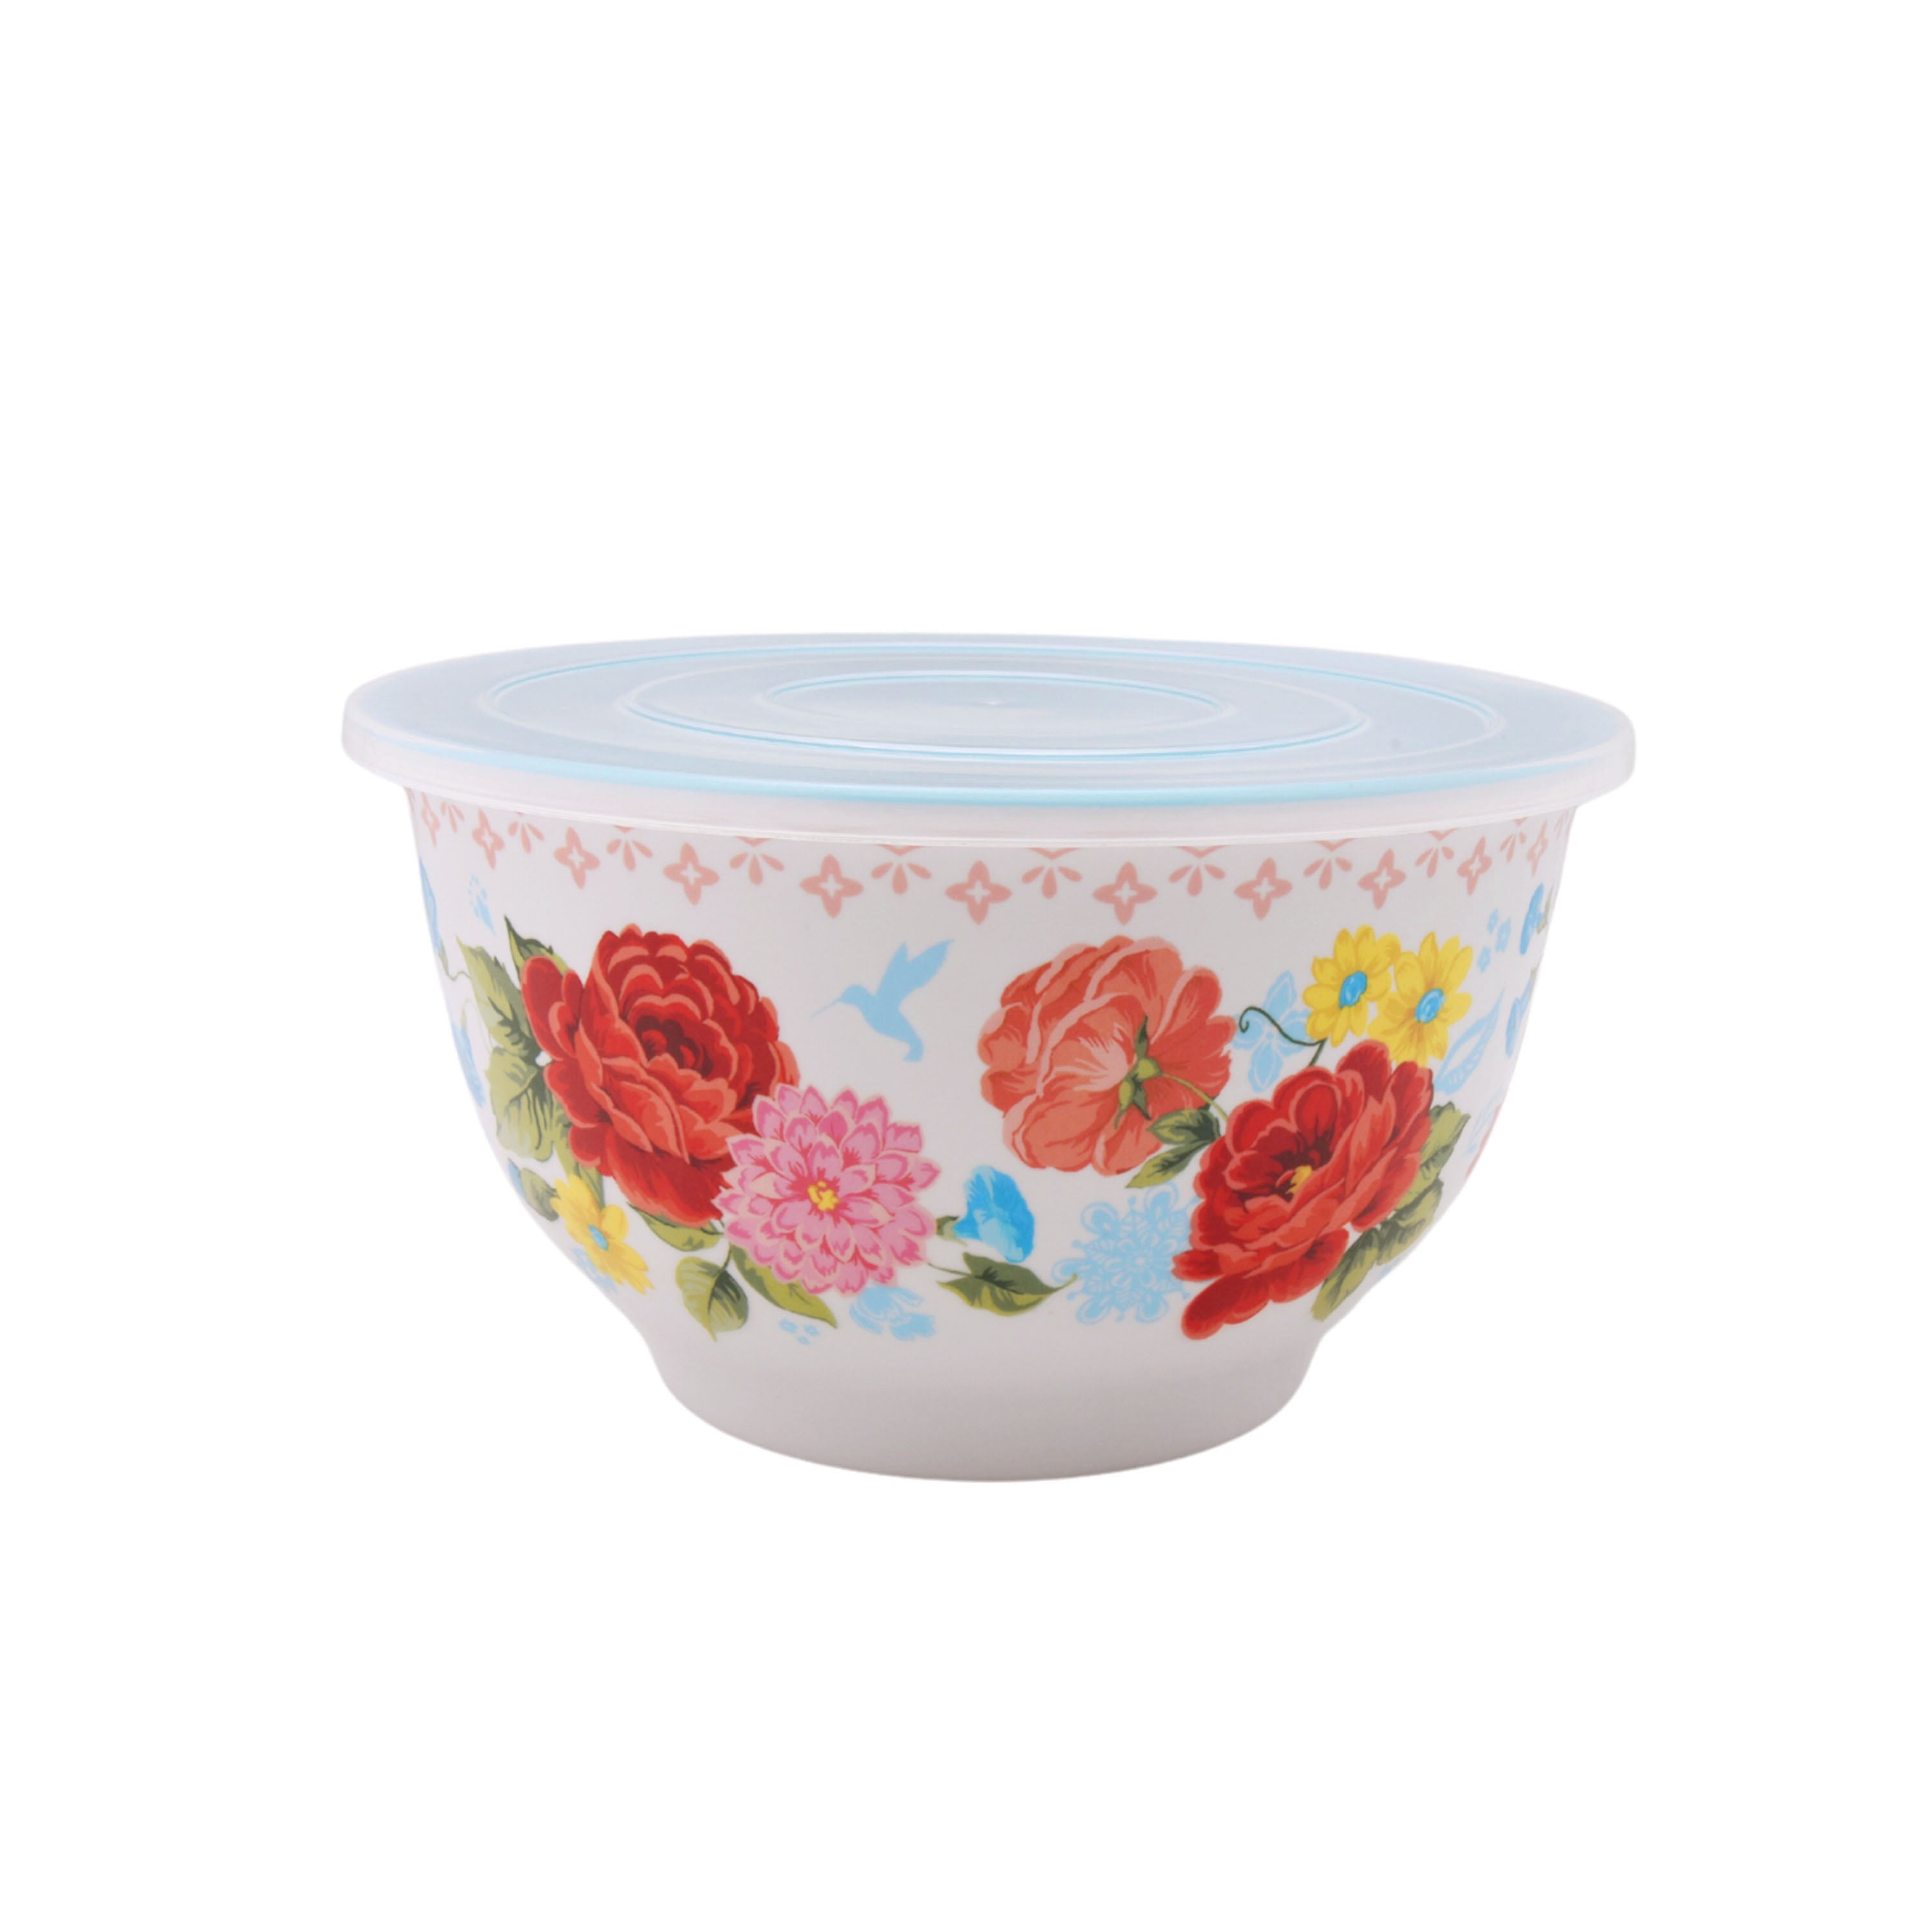 Pioneer Woman Mixing Bowl Set with Lids -$24.50 (reg. $49.00)